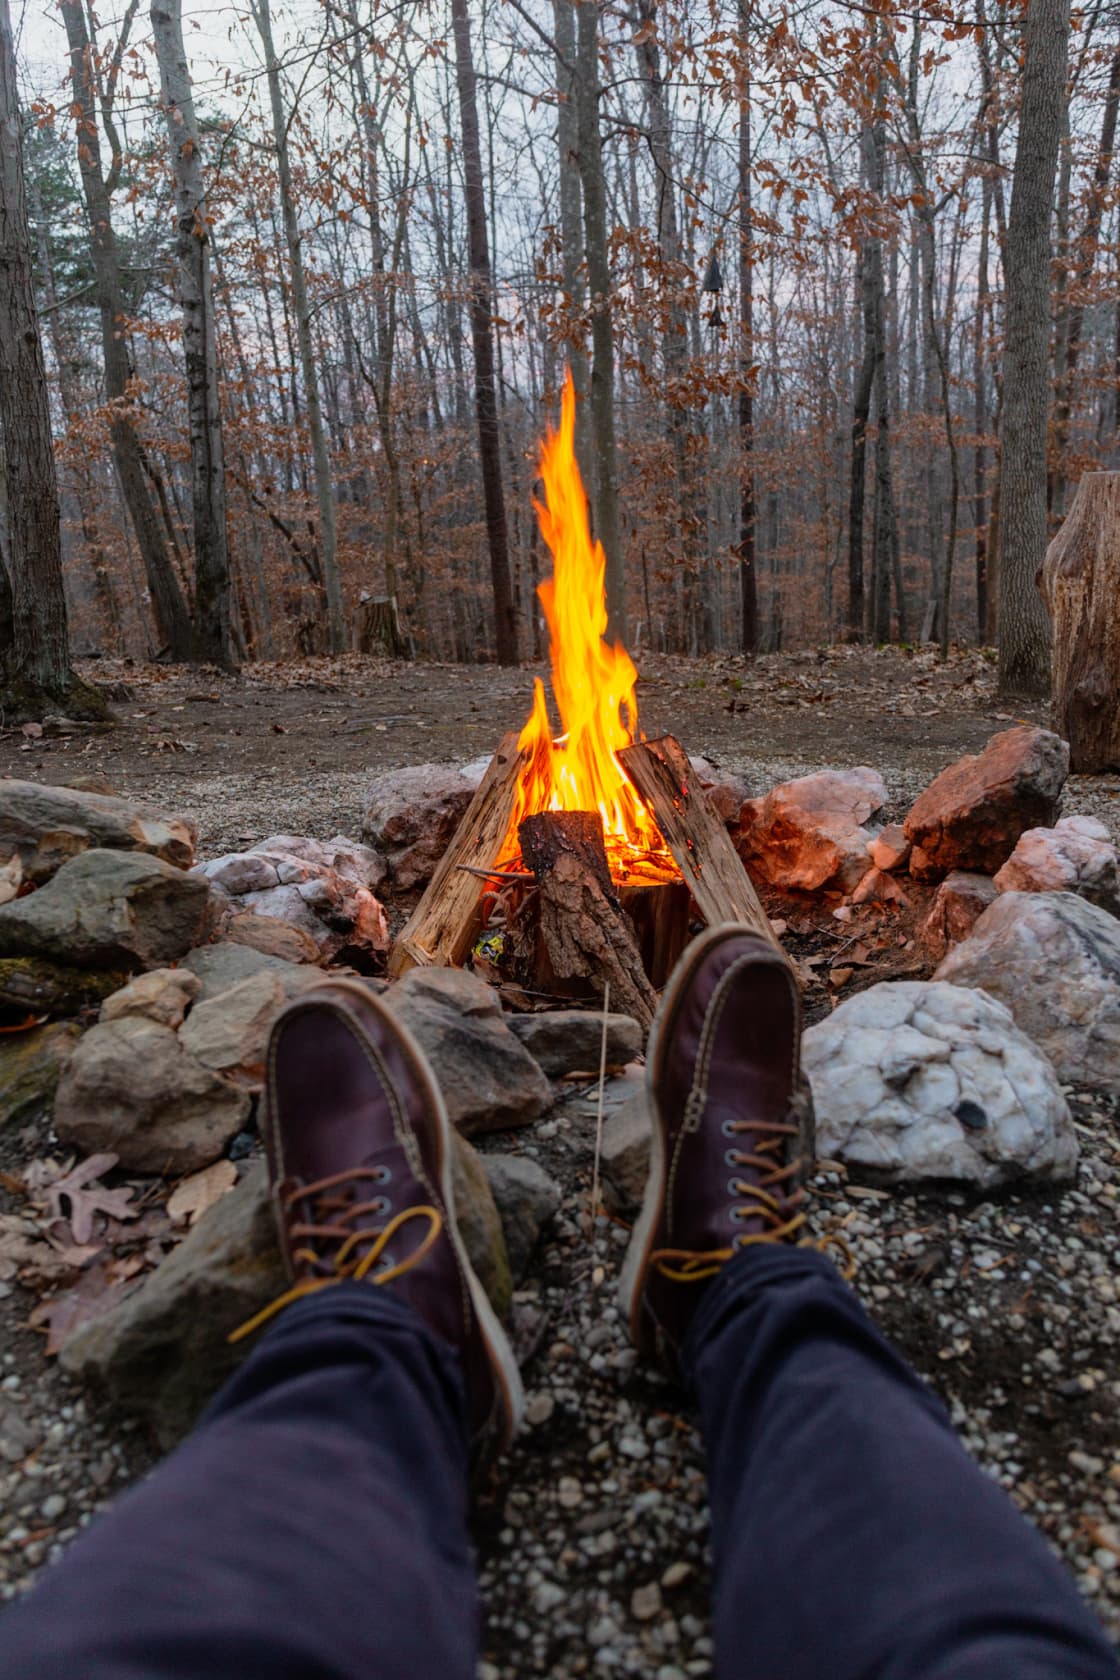 The fire is the main comfort of camp, whether in summer or winter. - Henry David Thoreau